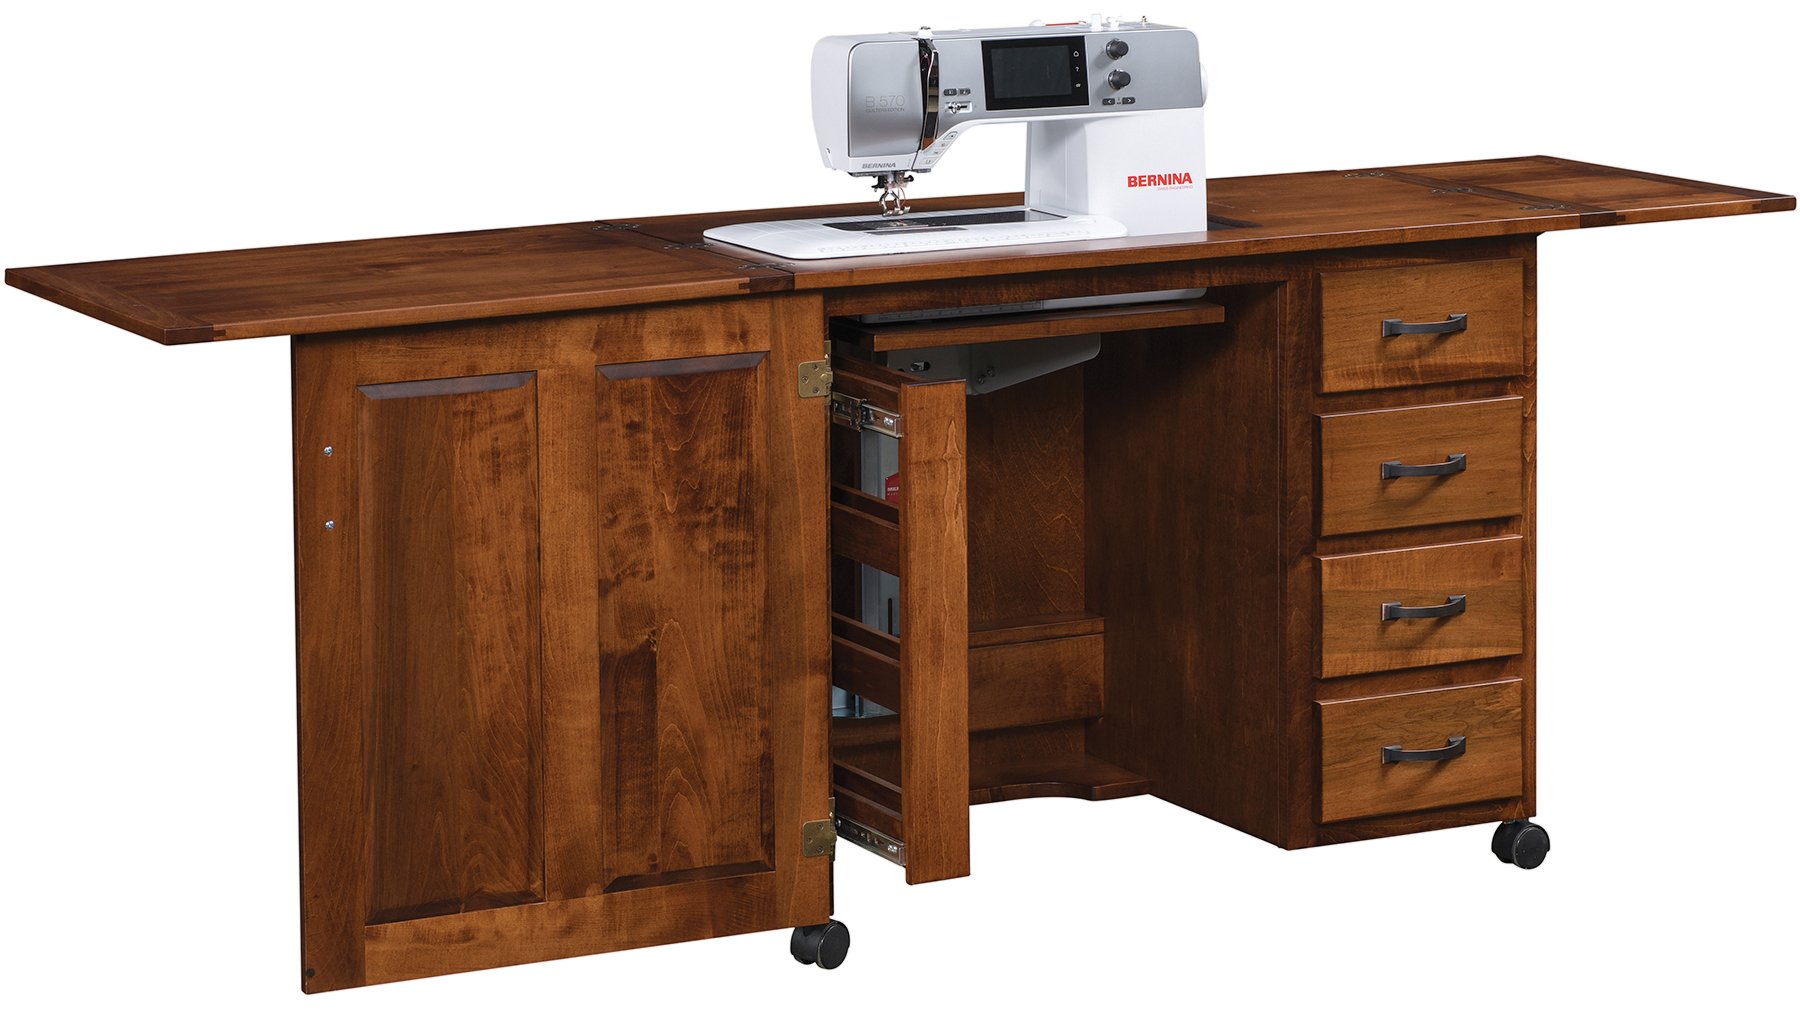 Timberside Woodworking 103-SD Single Door Sewing Cabinet – She Sewing Tables